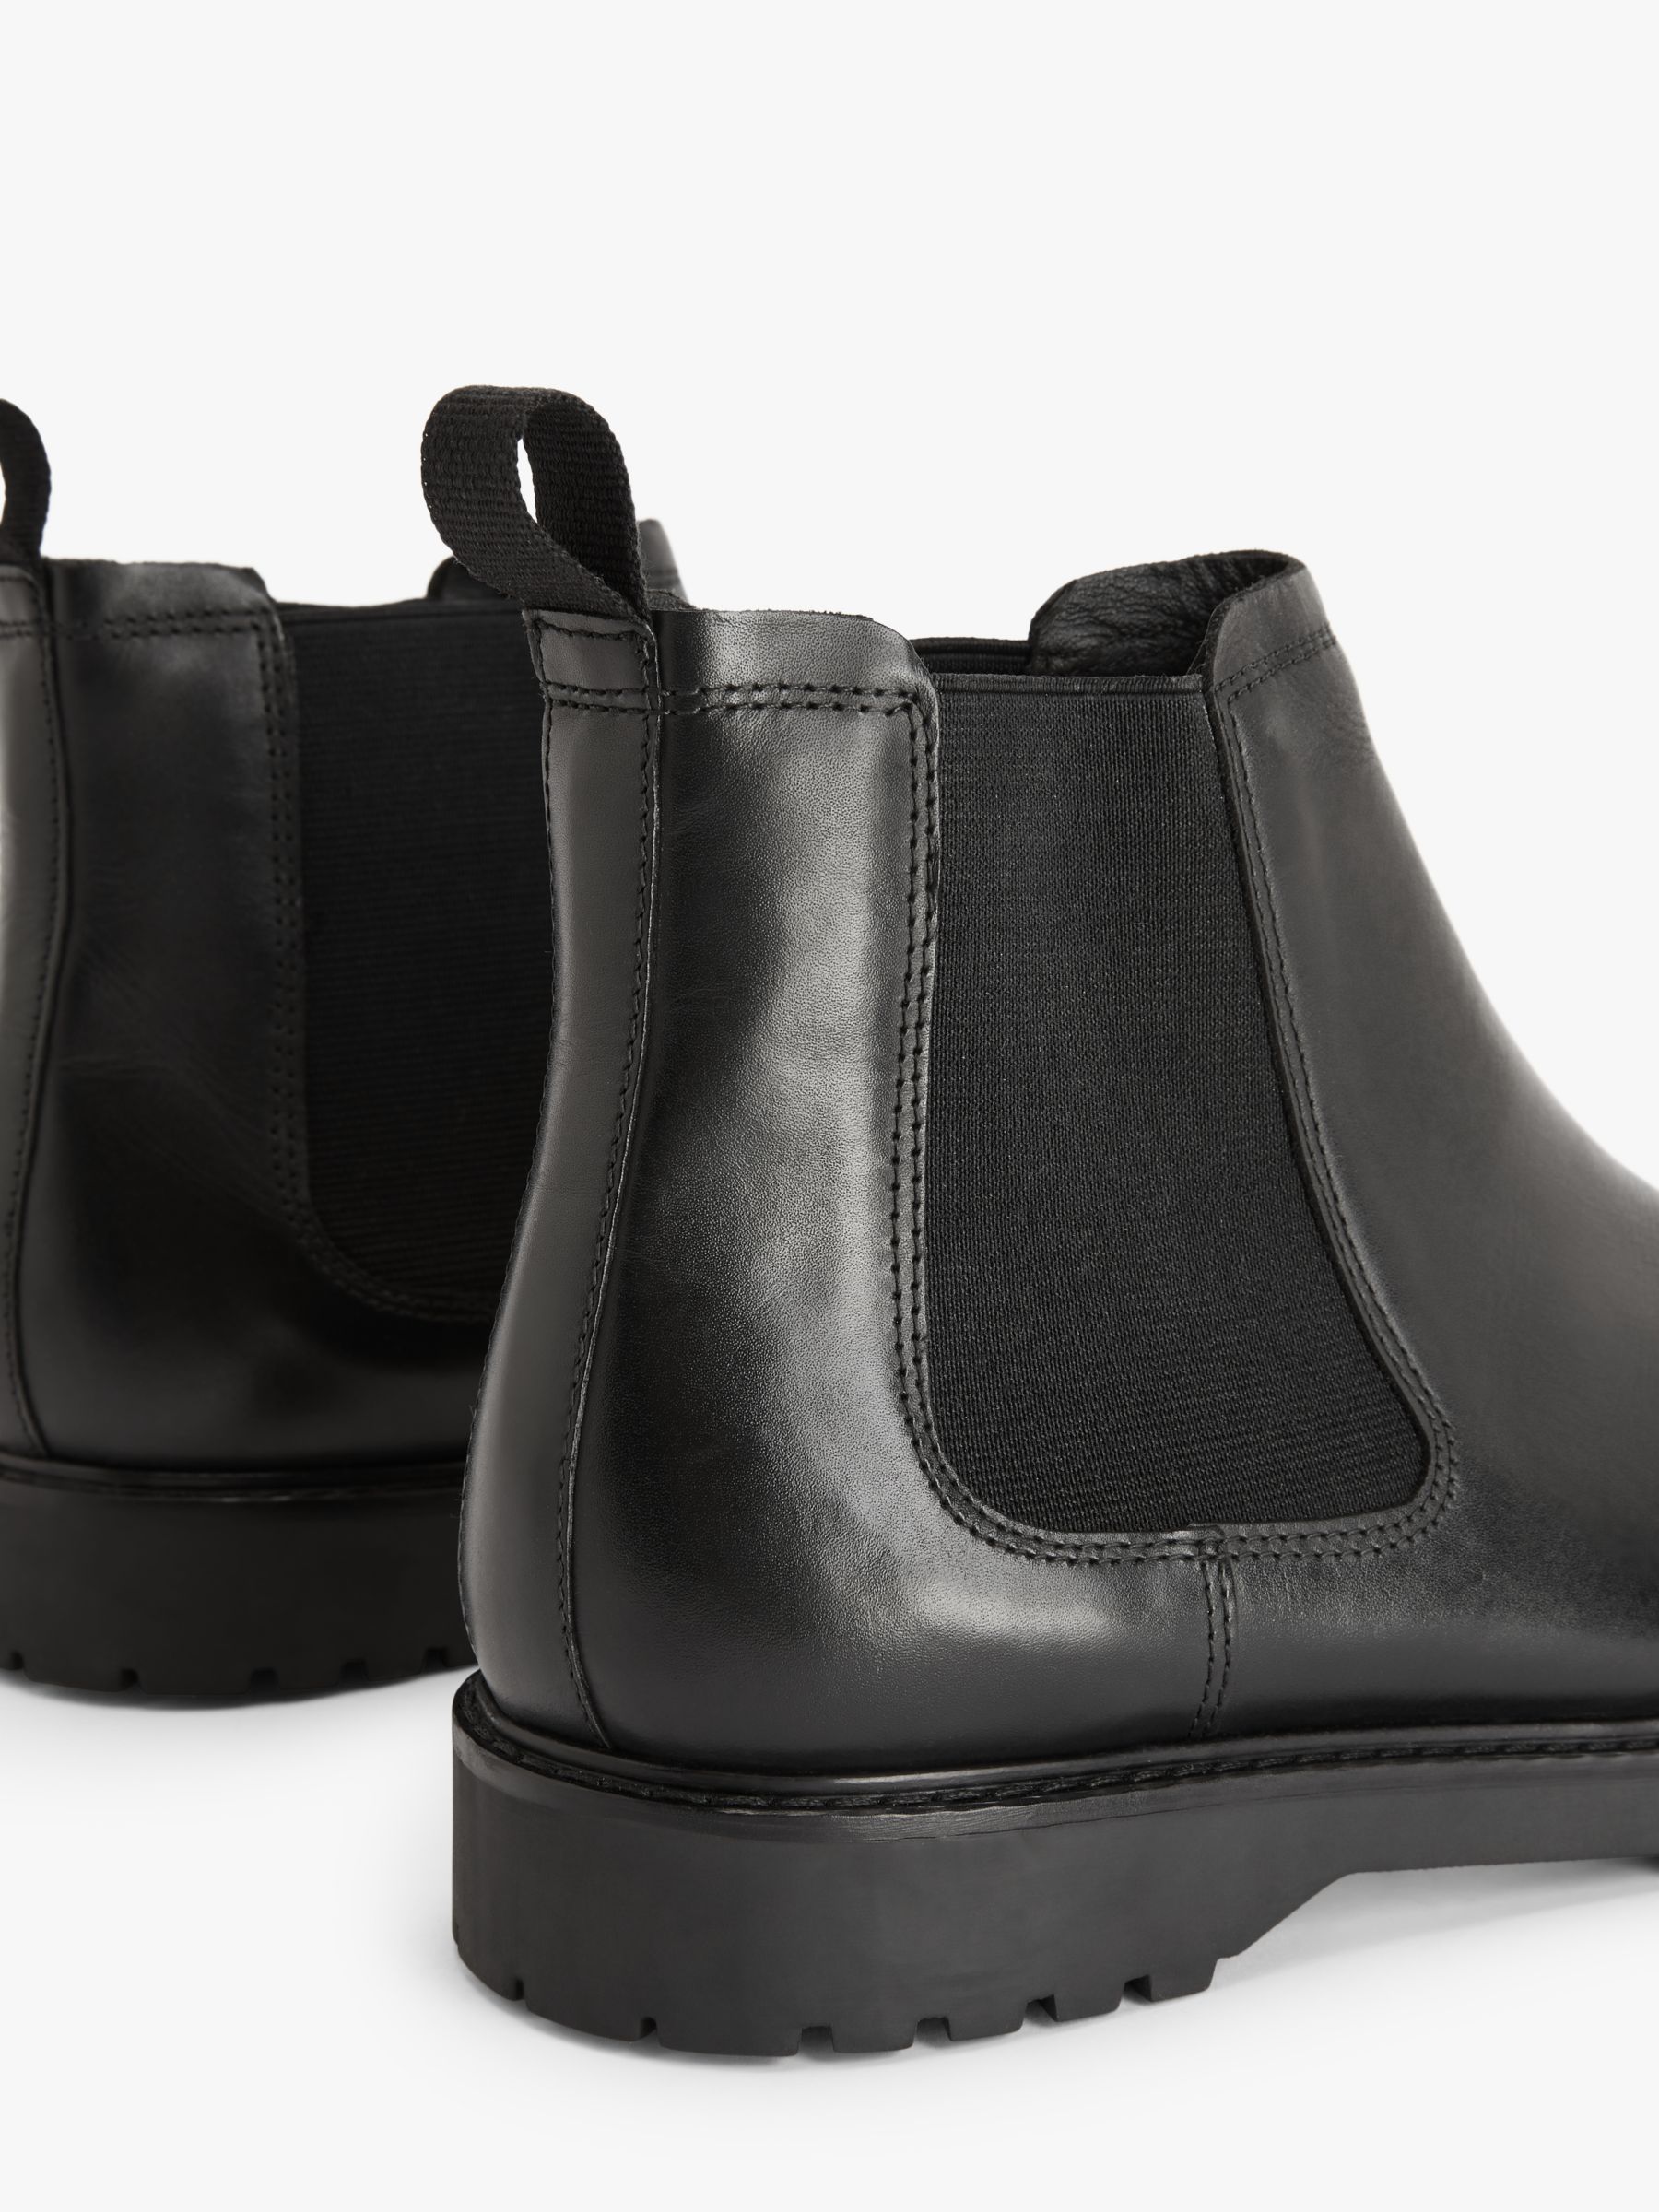 Kin Leather Chelsea Boots, Black at John Lewis & Partners